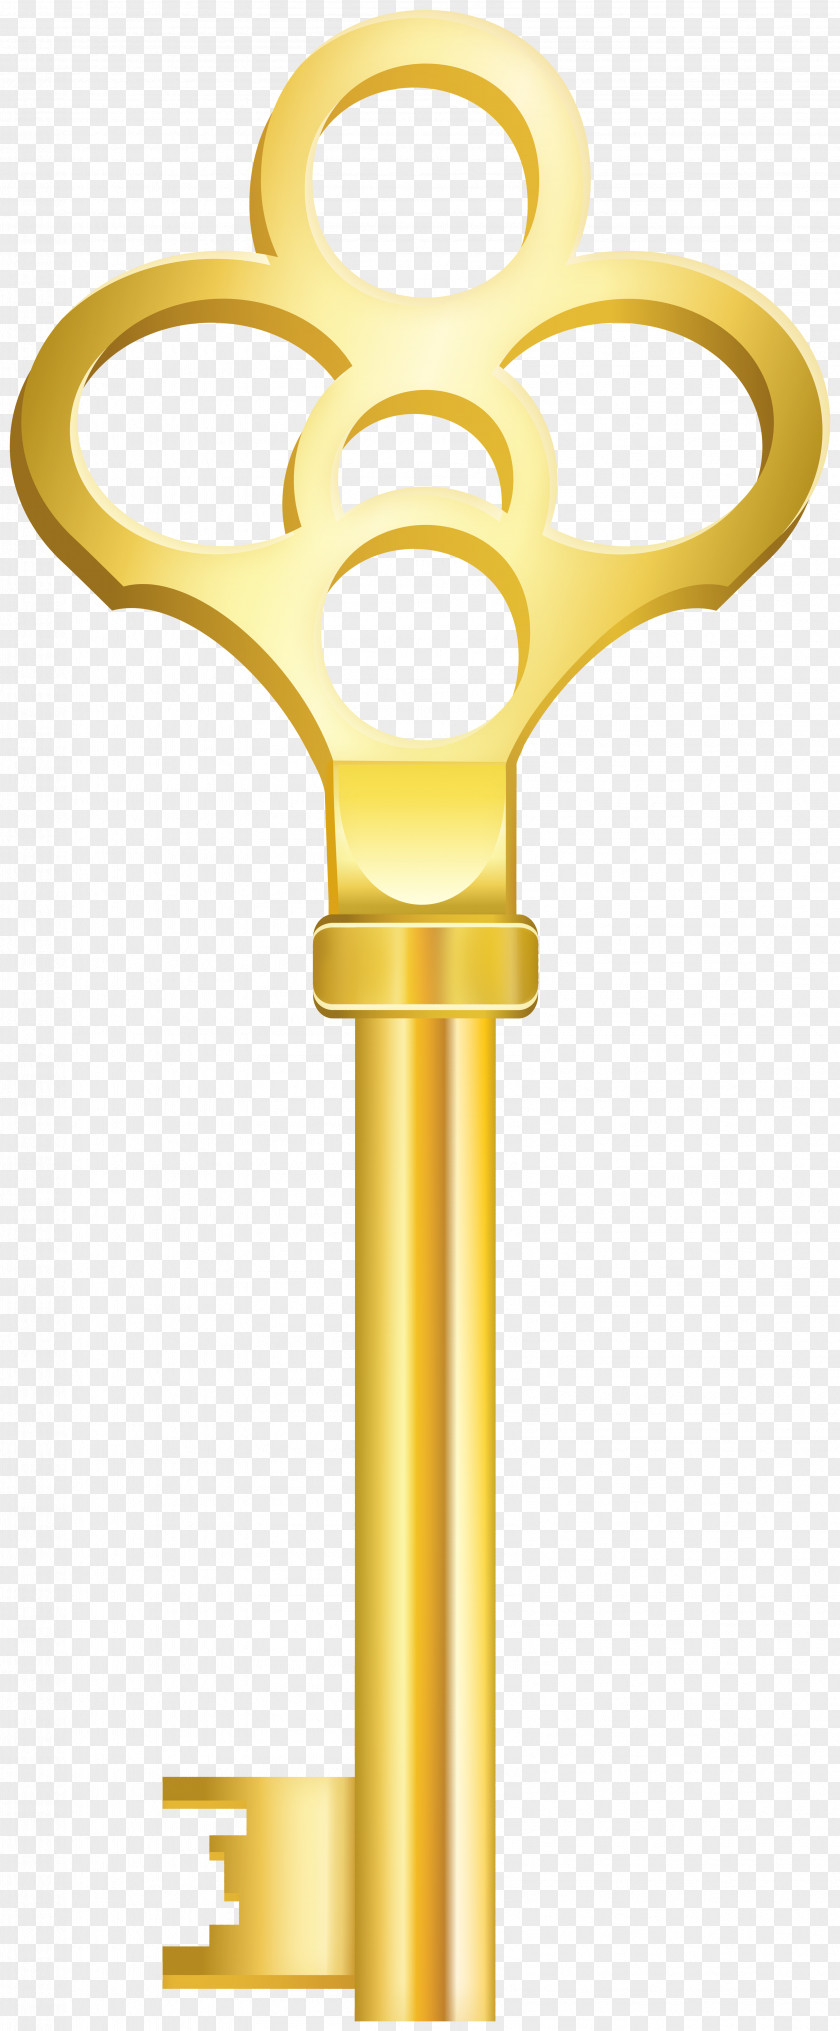 Key Golden Clip Art Transparency Openclipart Image PNG